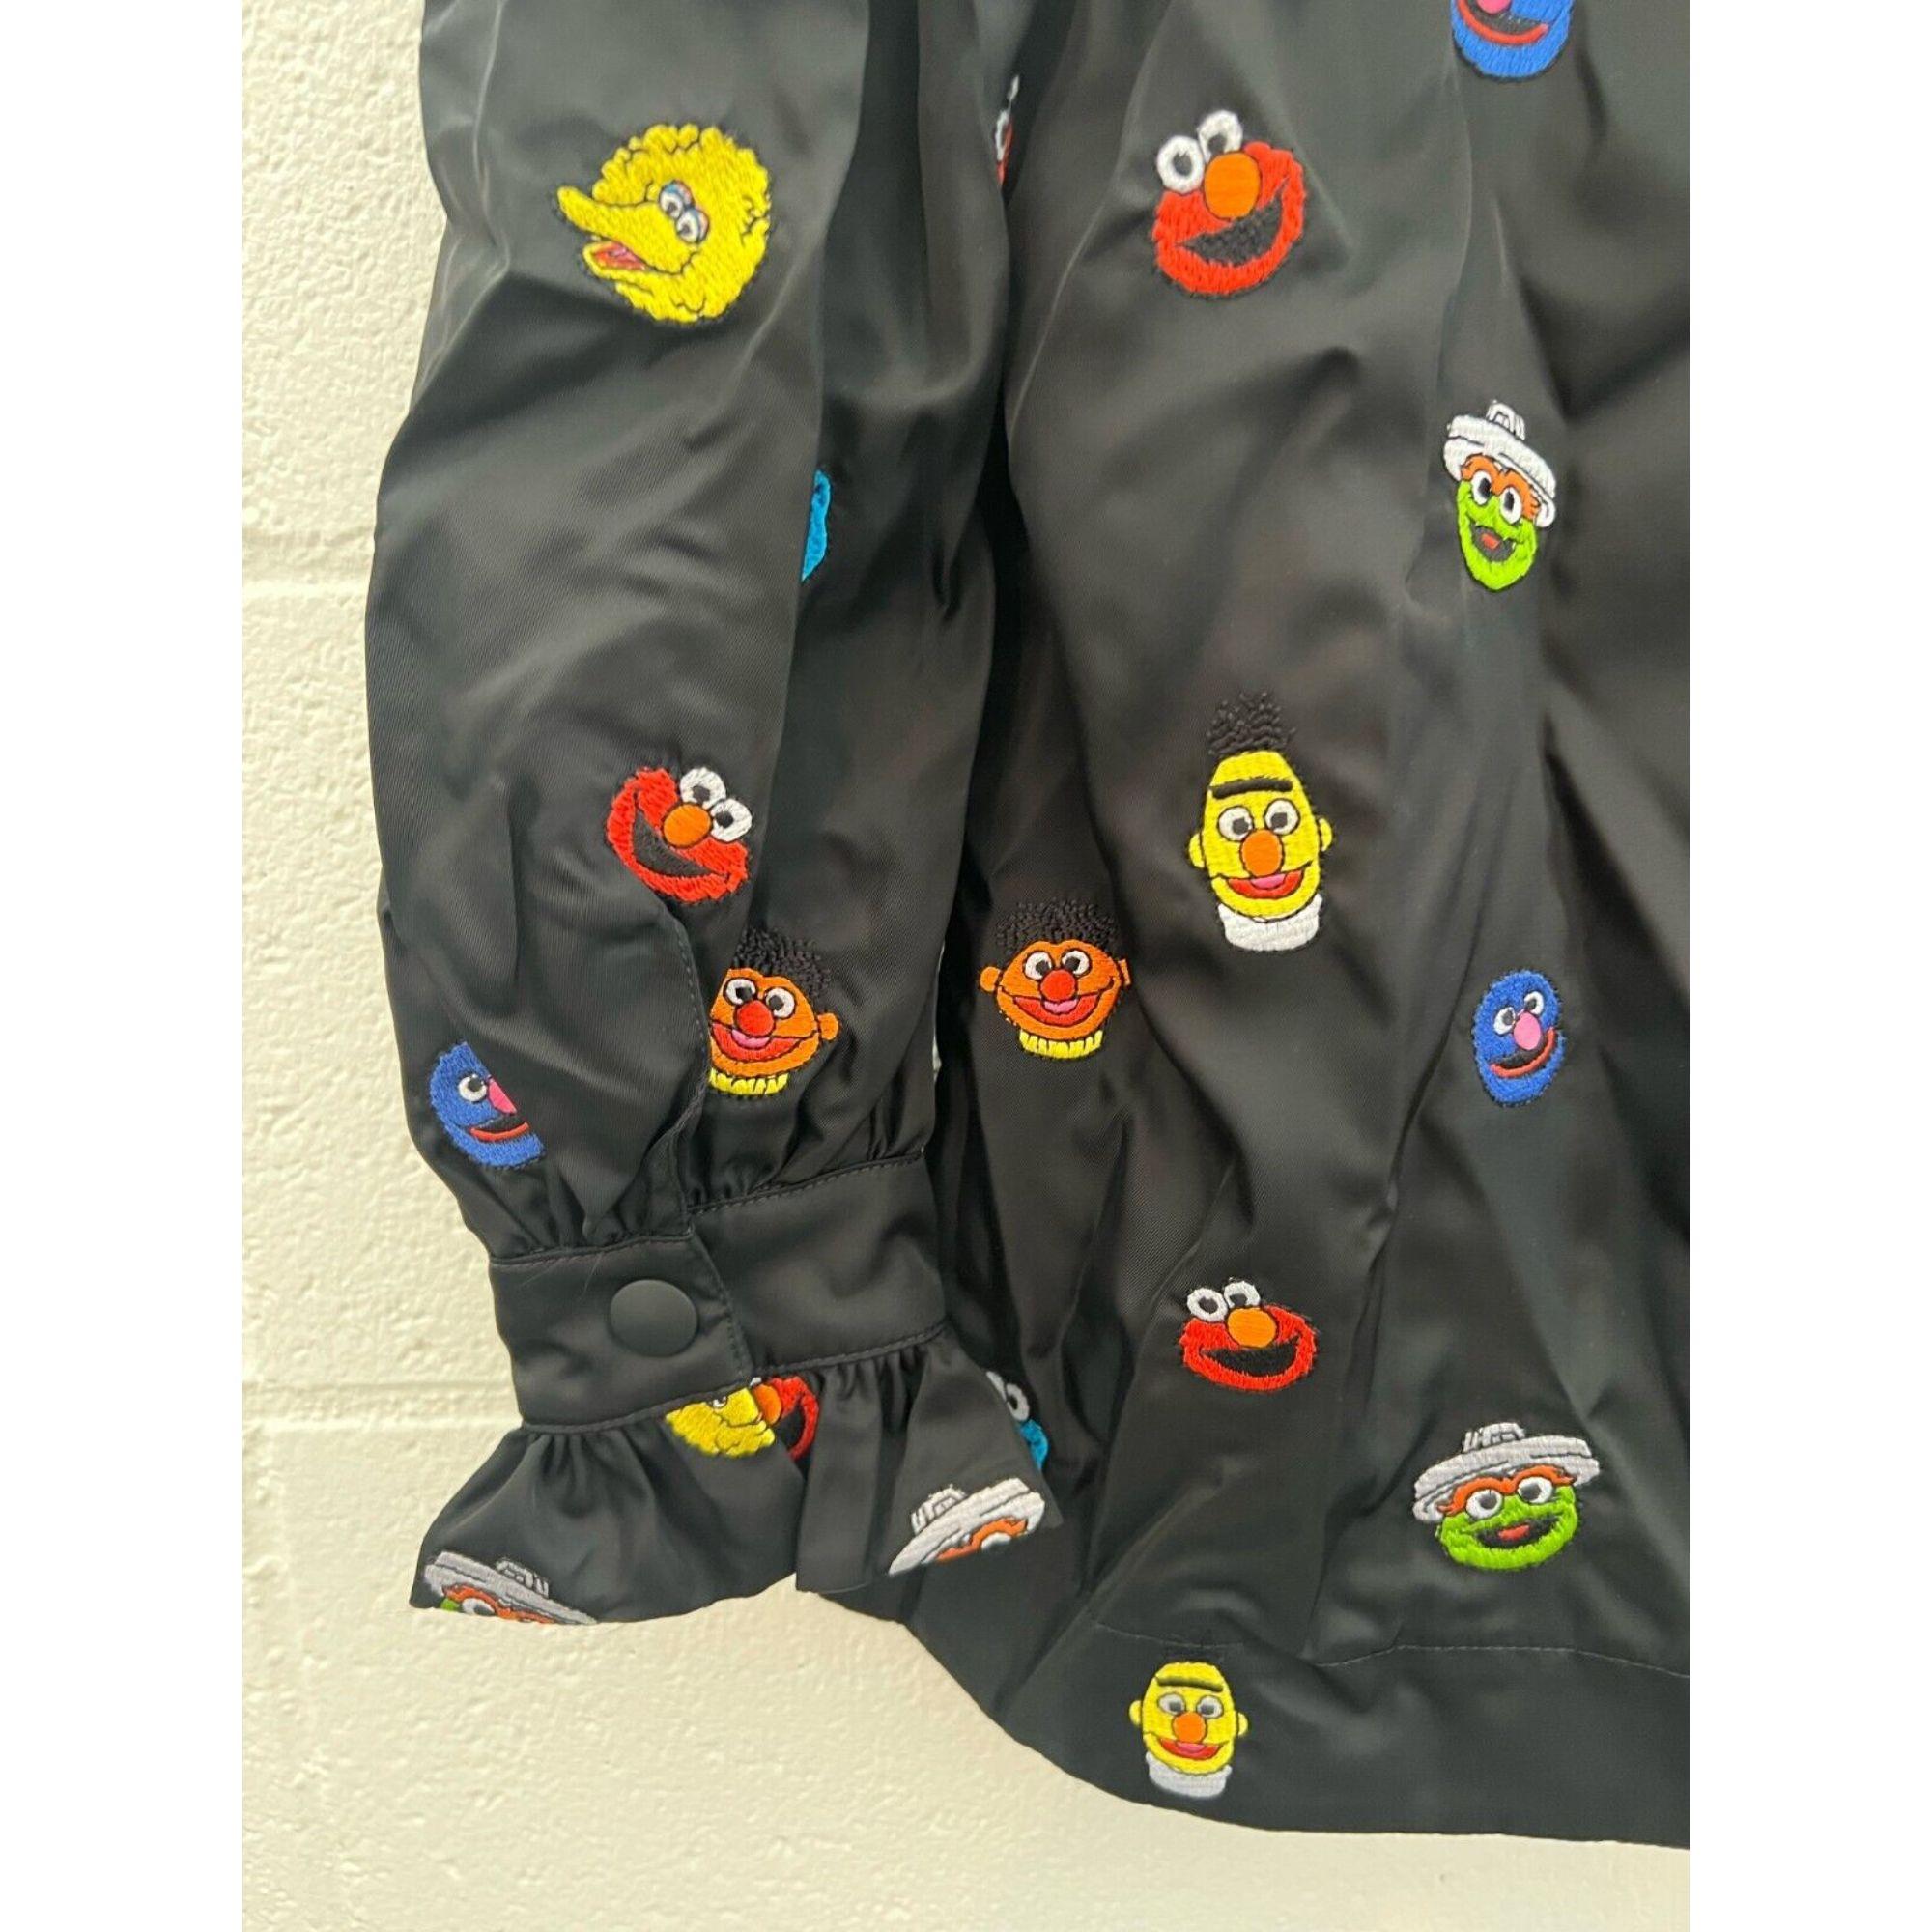 AW21 Moschino Couture Sesame Street Embroidered Hooded Jacket by Jeremy Scott For Sale 7